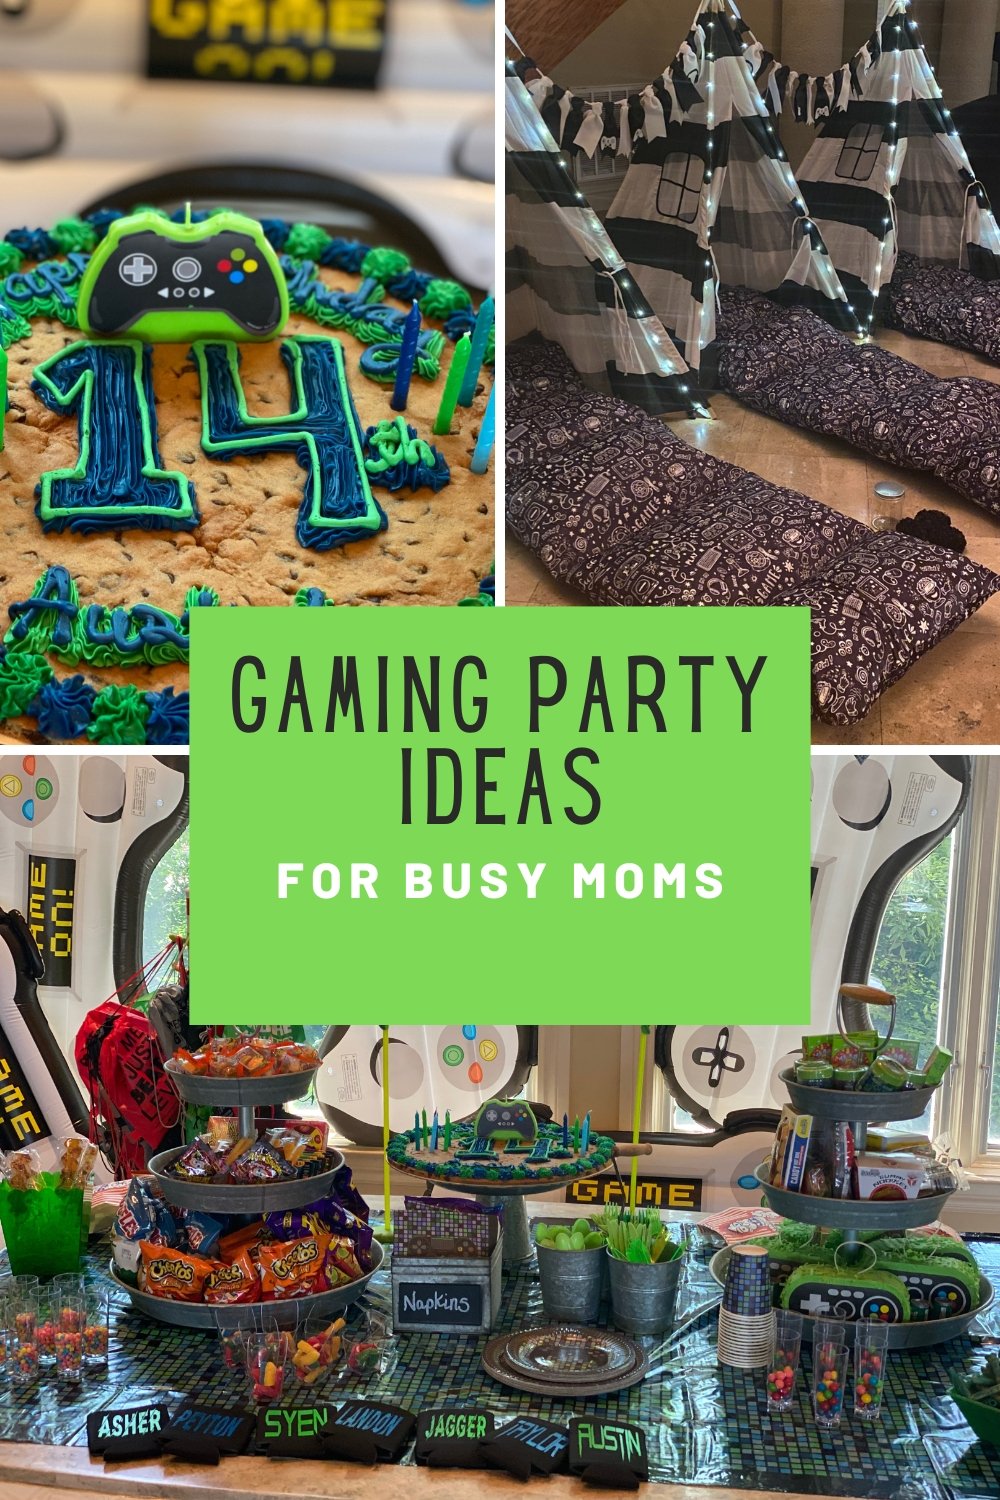 Gaming Party Ideas for Busy Moms - Chicky Chicky Bling Bling, LLC